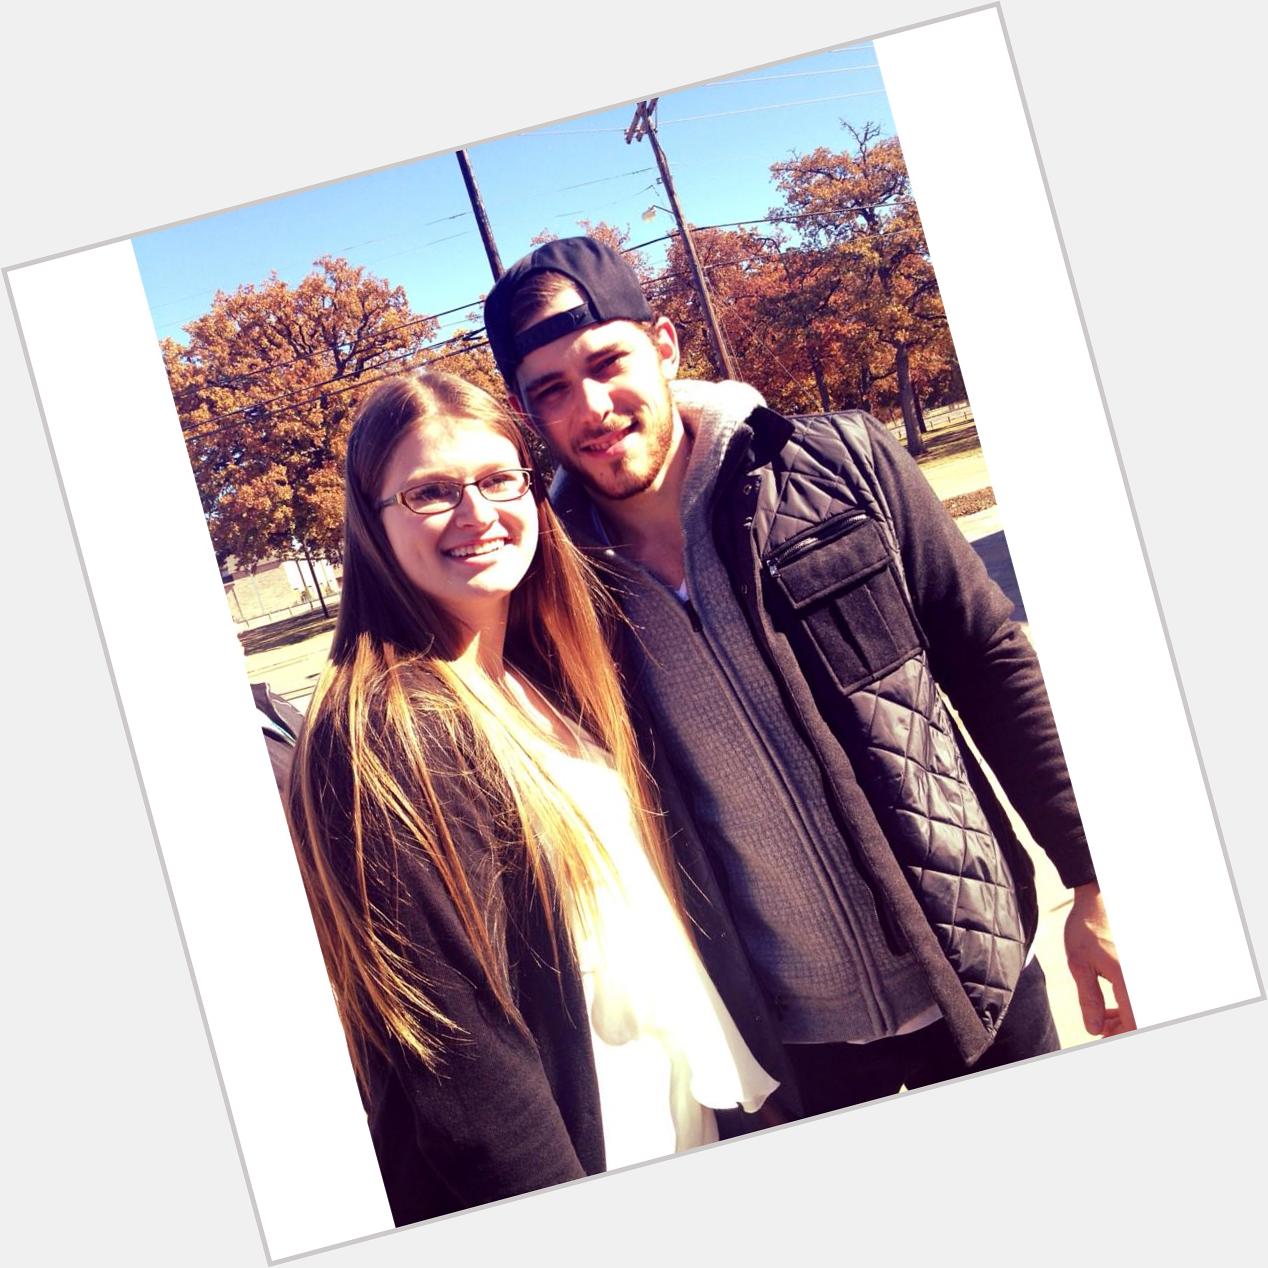 HAPPY BIRTHDAY TYLER SEGUIN! Thanks for being in Dallas instead of those God awful Bruins 